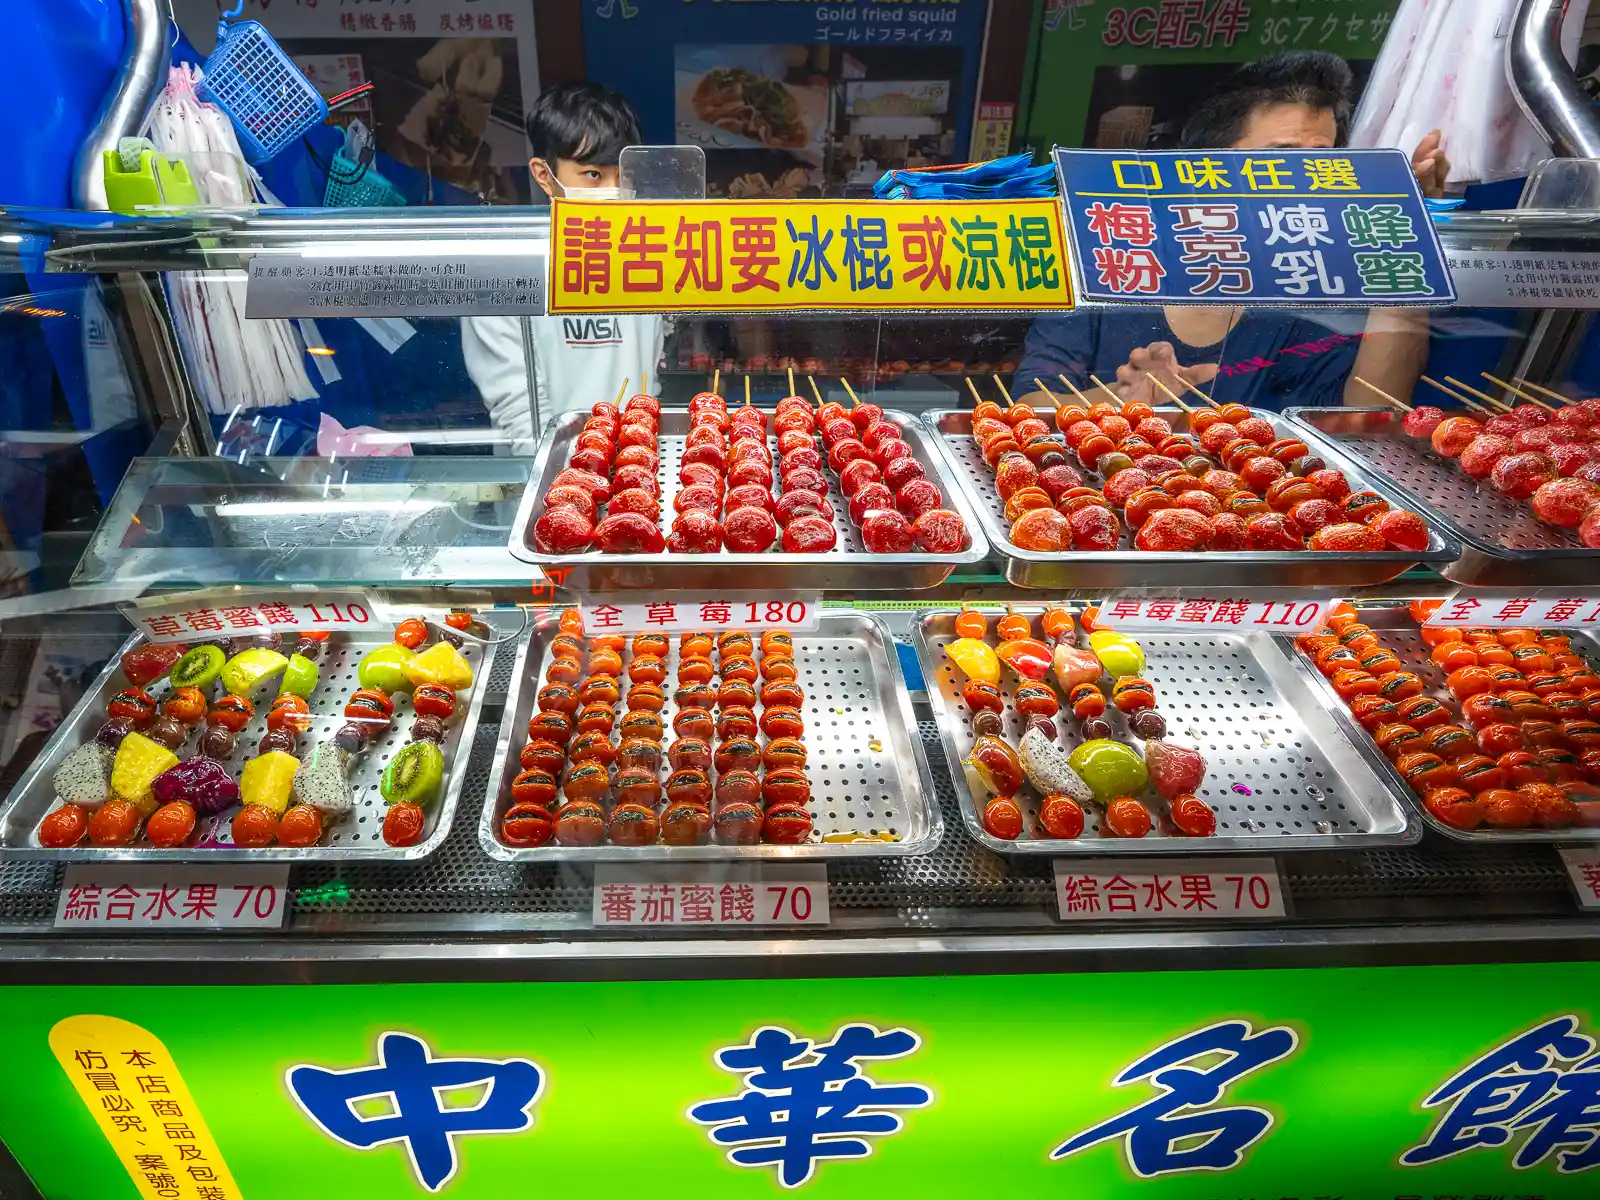 Glazed candied fruits are on display at a street food stand.